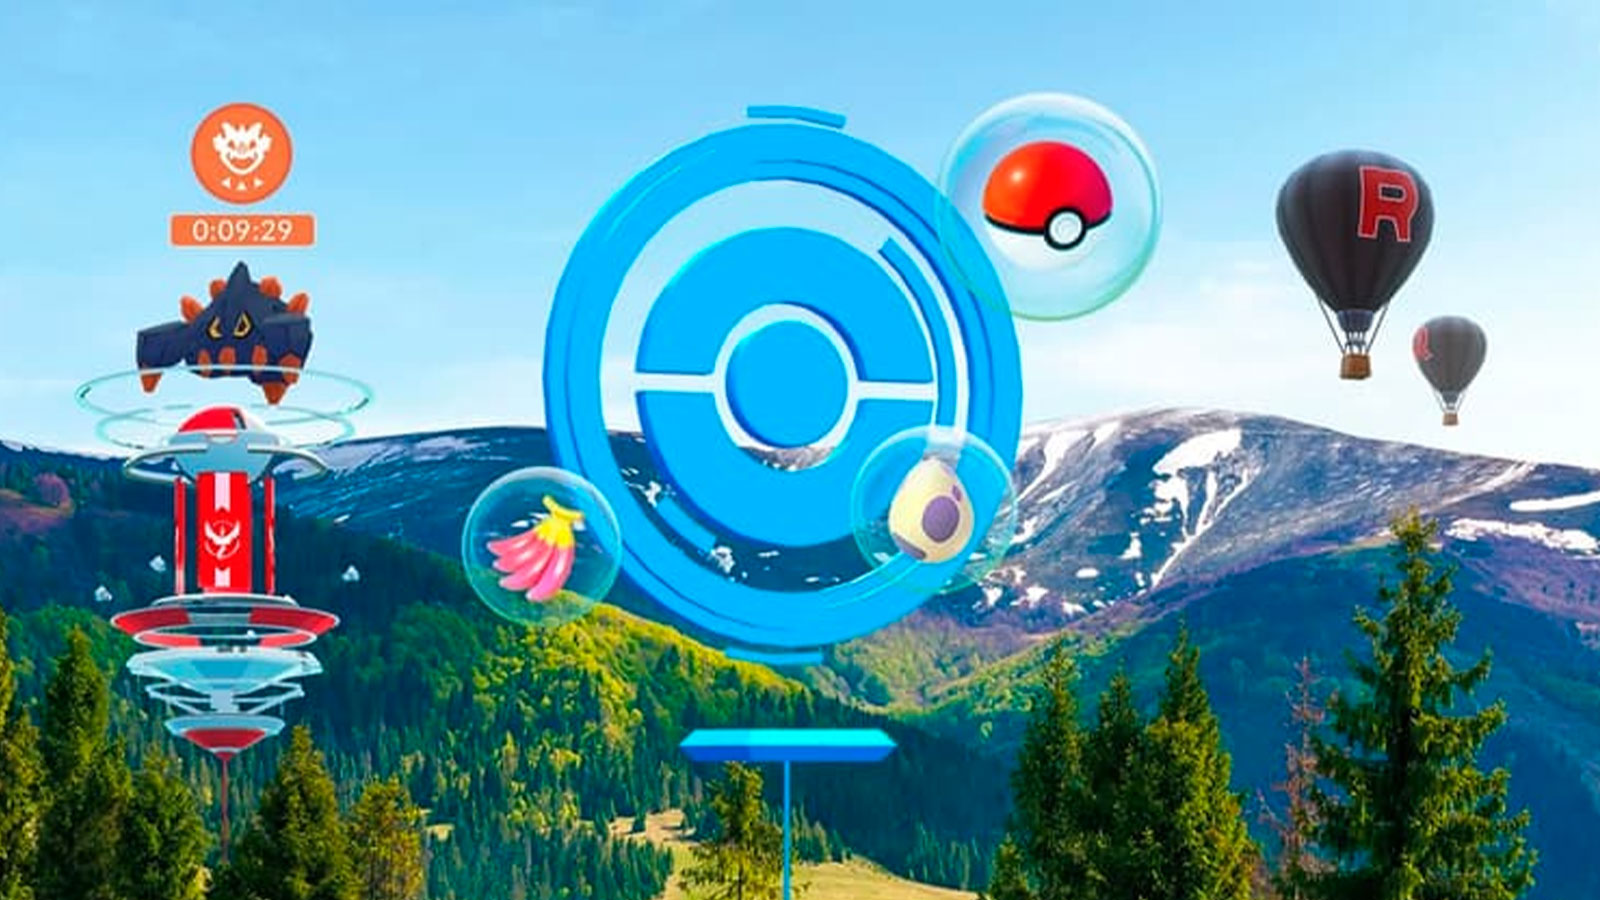 Pokémon Go players are tired of these pointless challenges